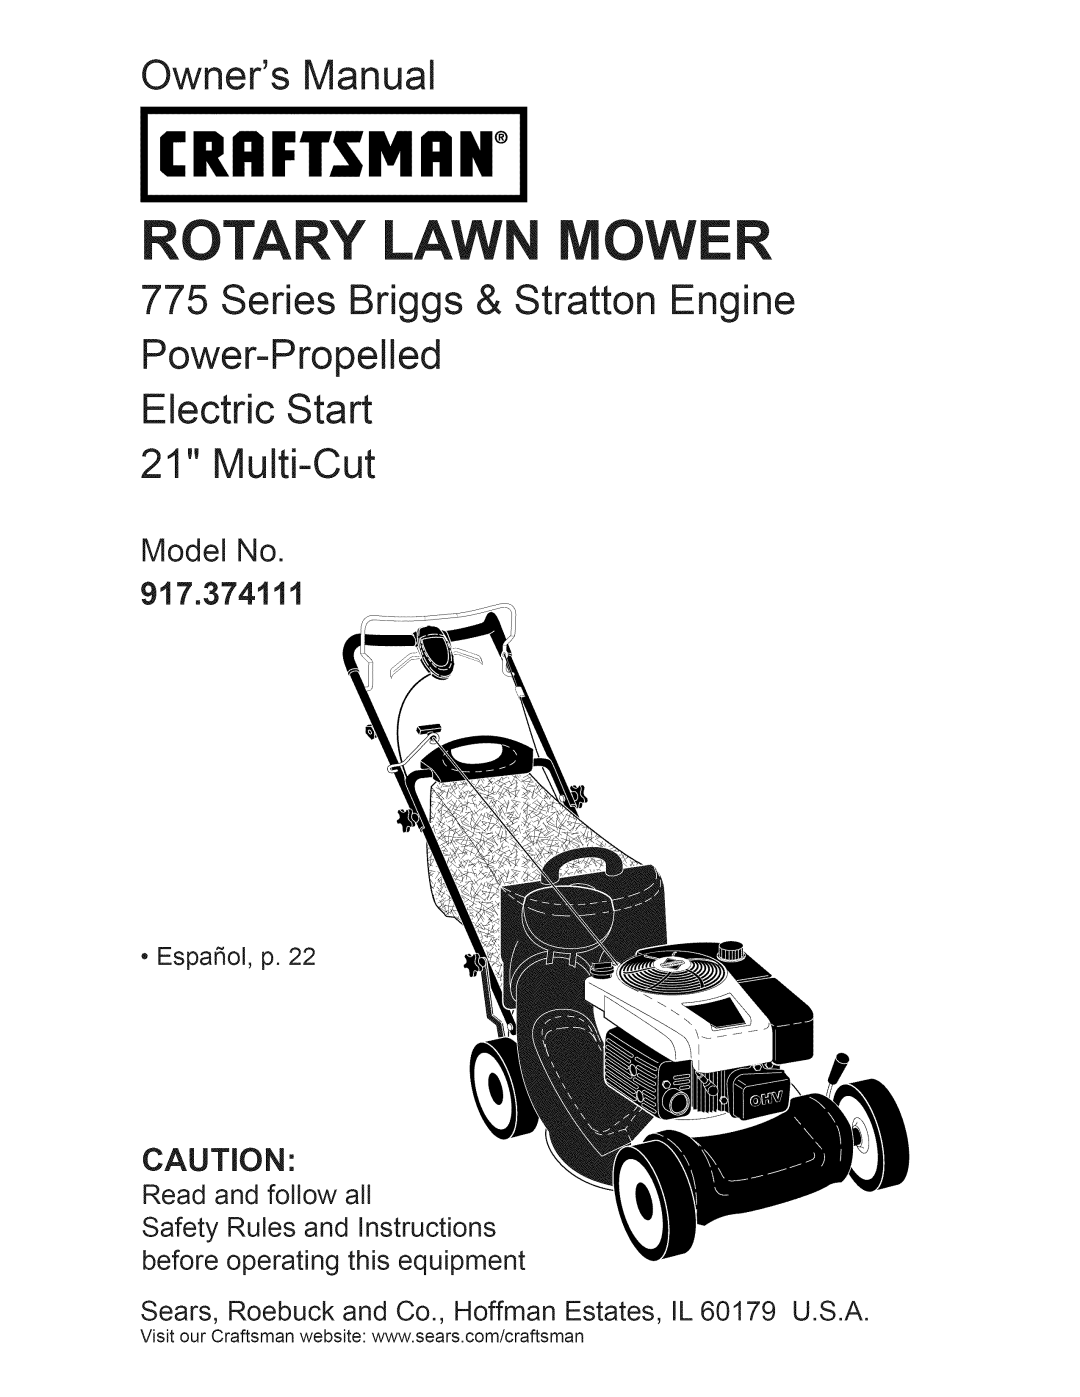 Craftsman manual Read and follow all, •Espa_ol, p, Craftsman, Rotary Lawn Mower, Owners Manual, Model No 917.374111 